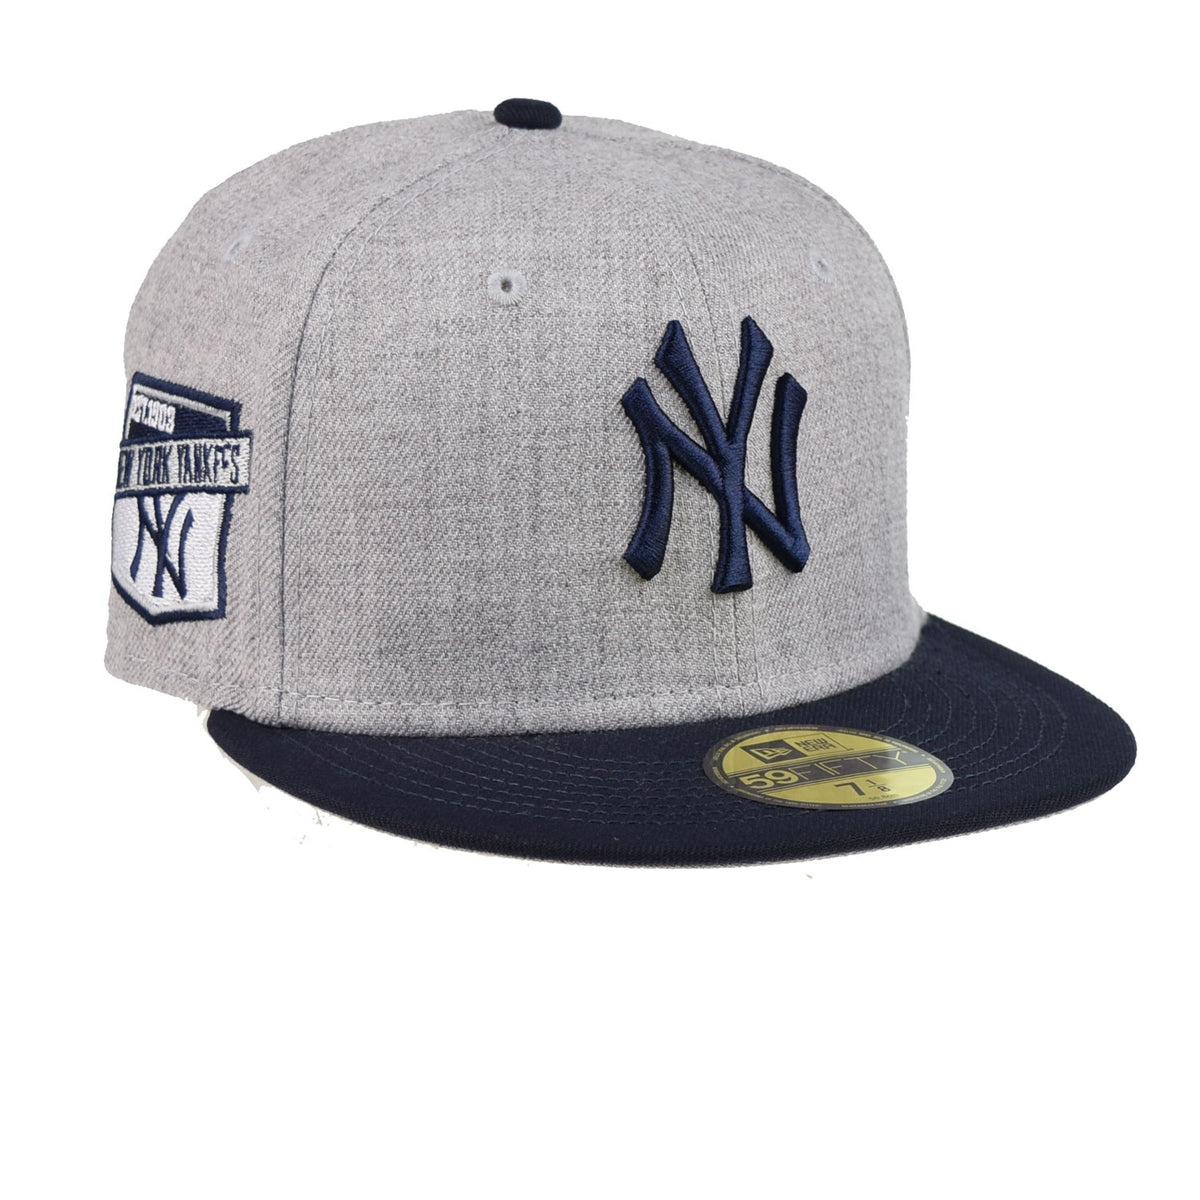 New Era New York Yankees 59FIFTY Authentic Collection Hat Navy 7